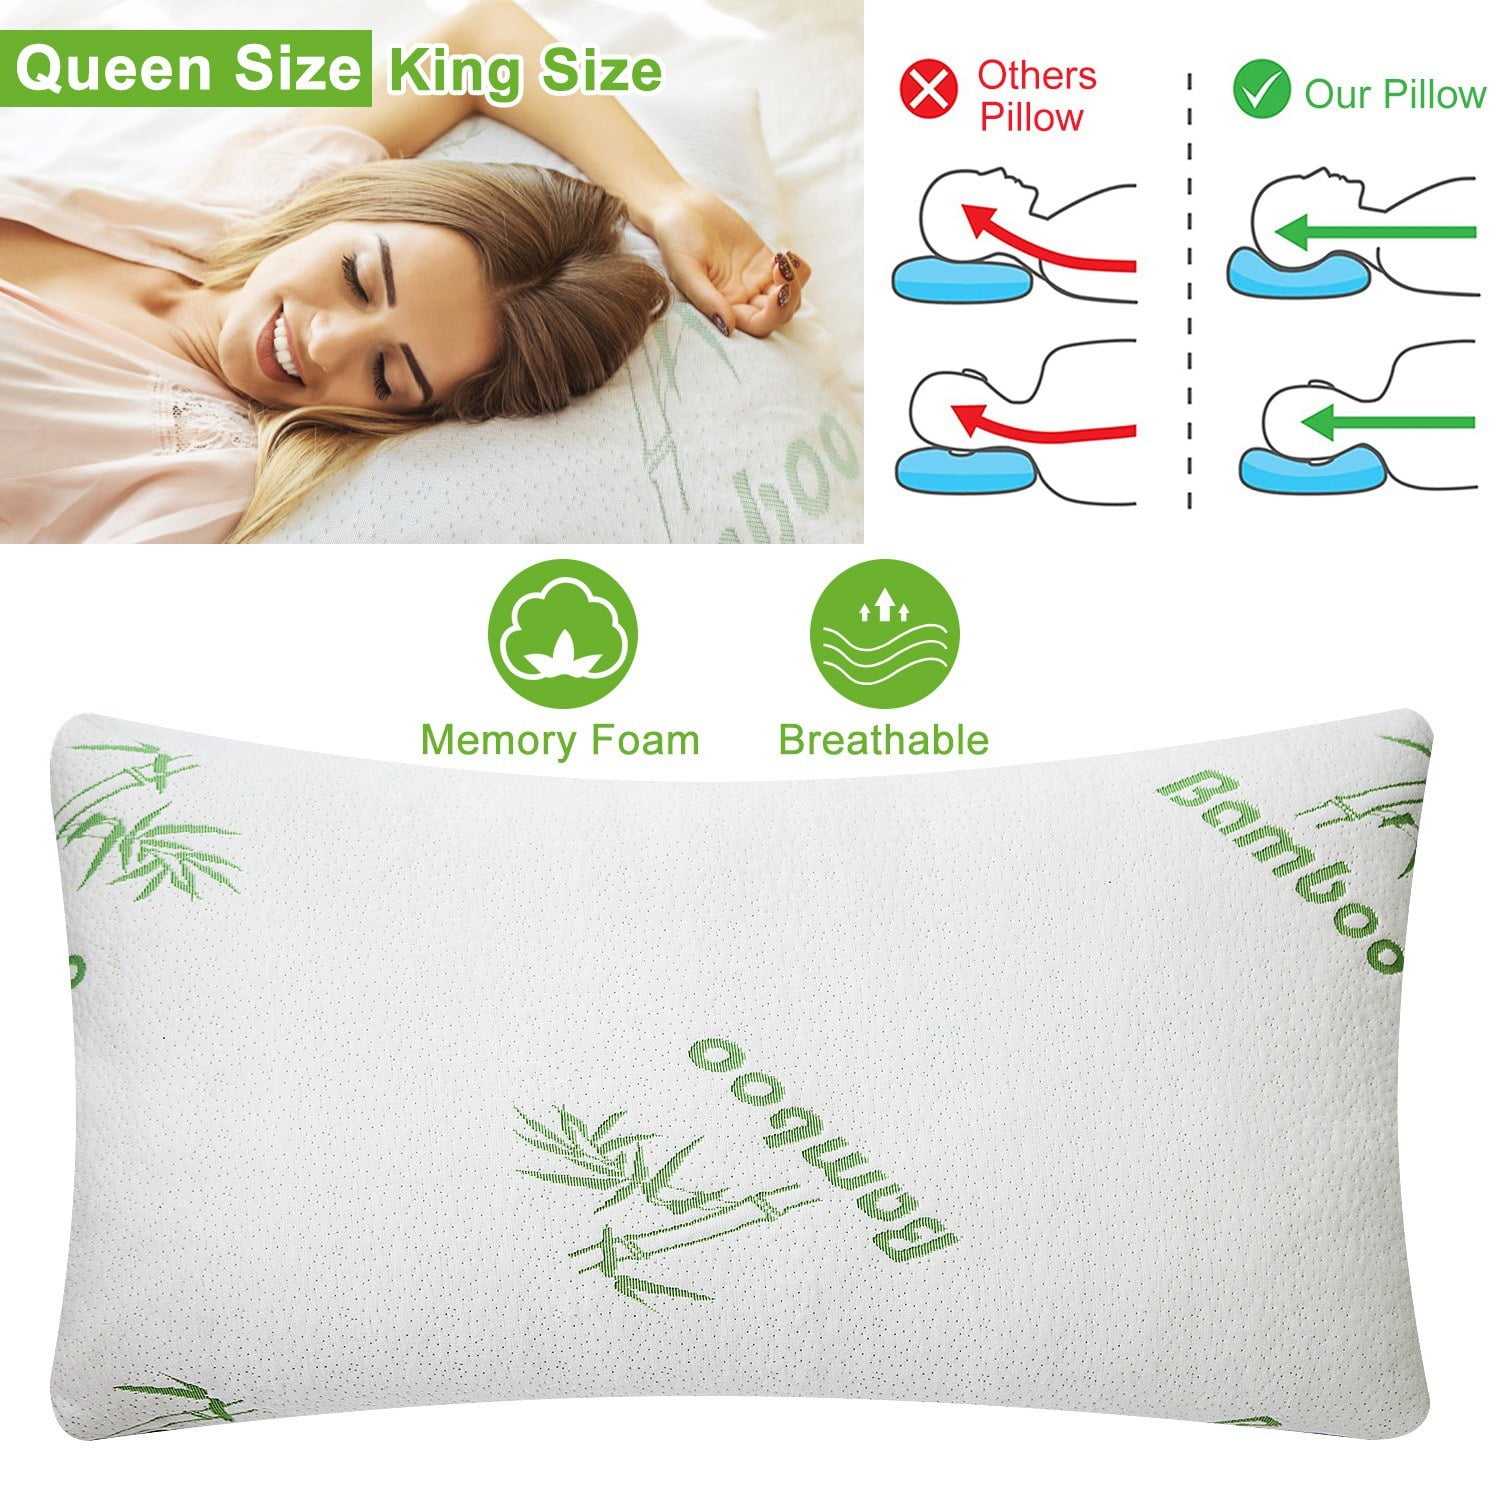 1 Bamboo Shredded Memory Foam Bed Pillow W/ Hypoallergenic Cover Queen Size LP 